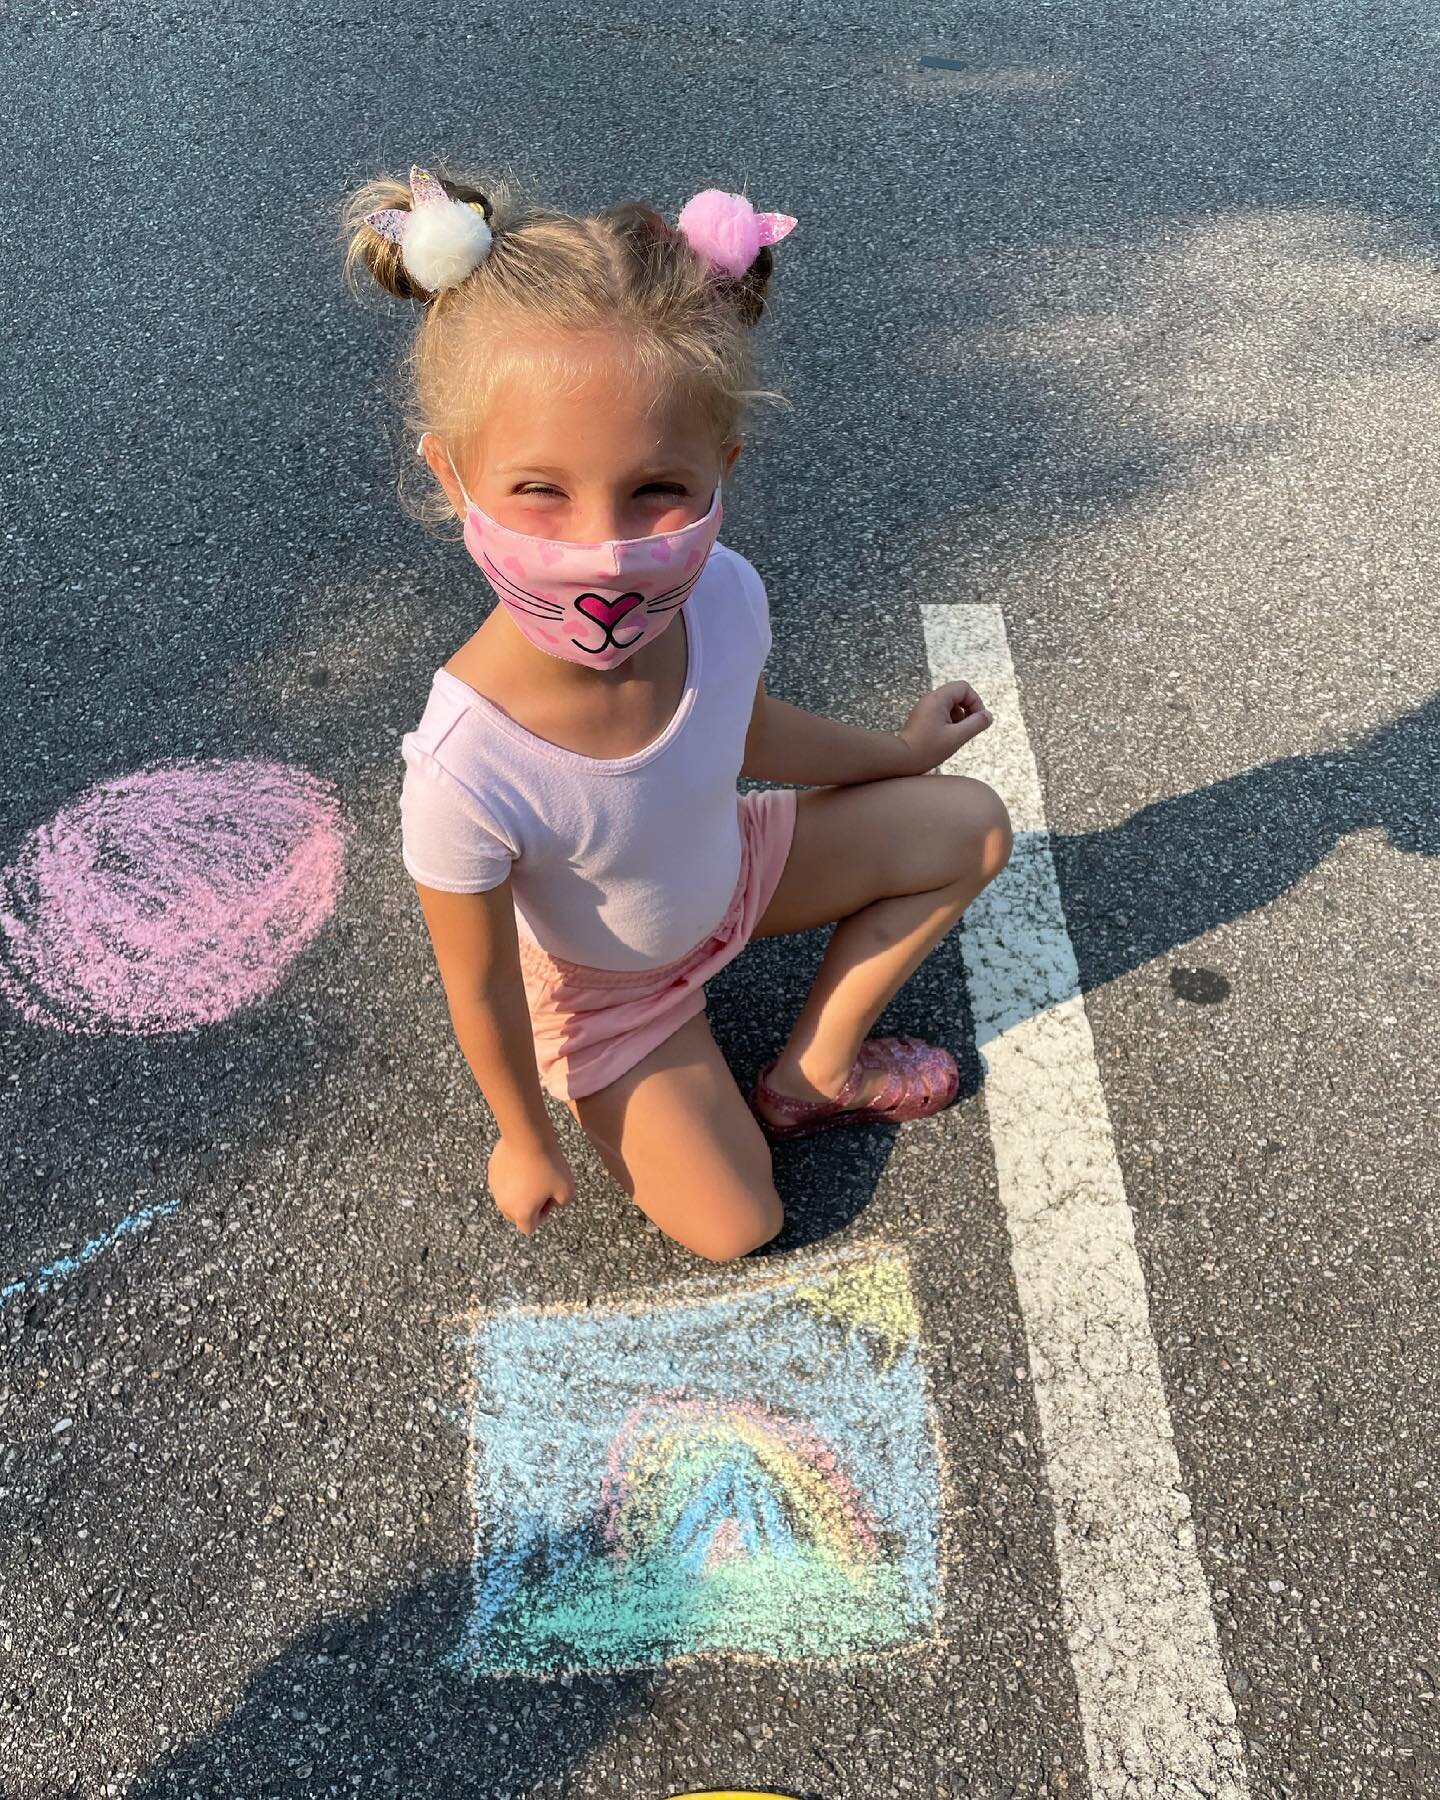 Camp week three is in full swing and it was a beautiful day for sidewalk chalk!!☀️🌈